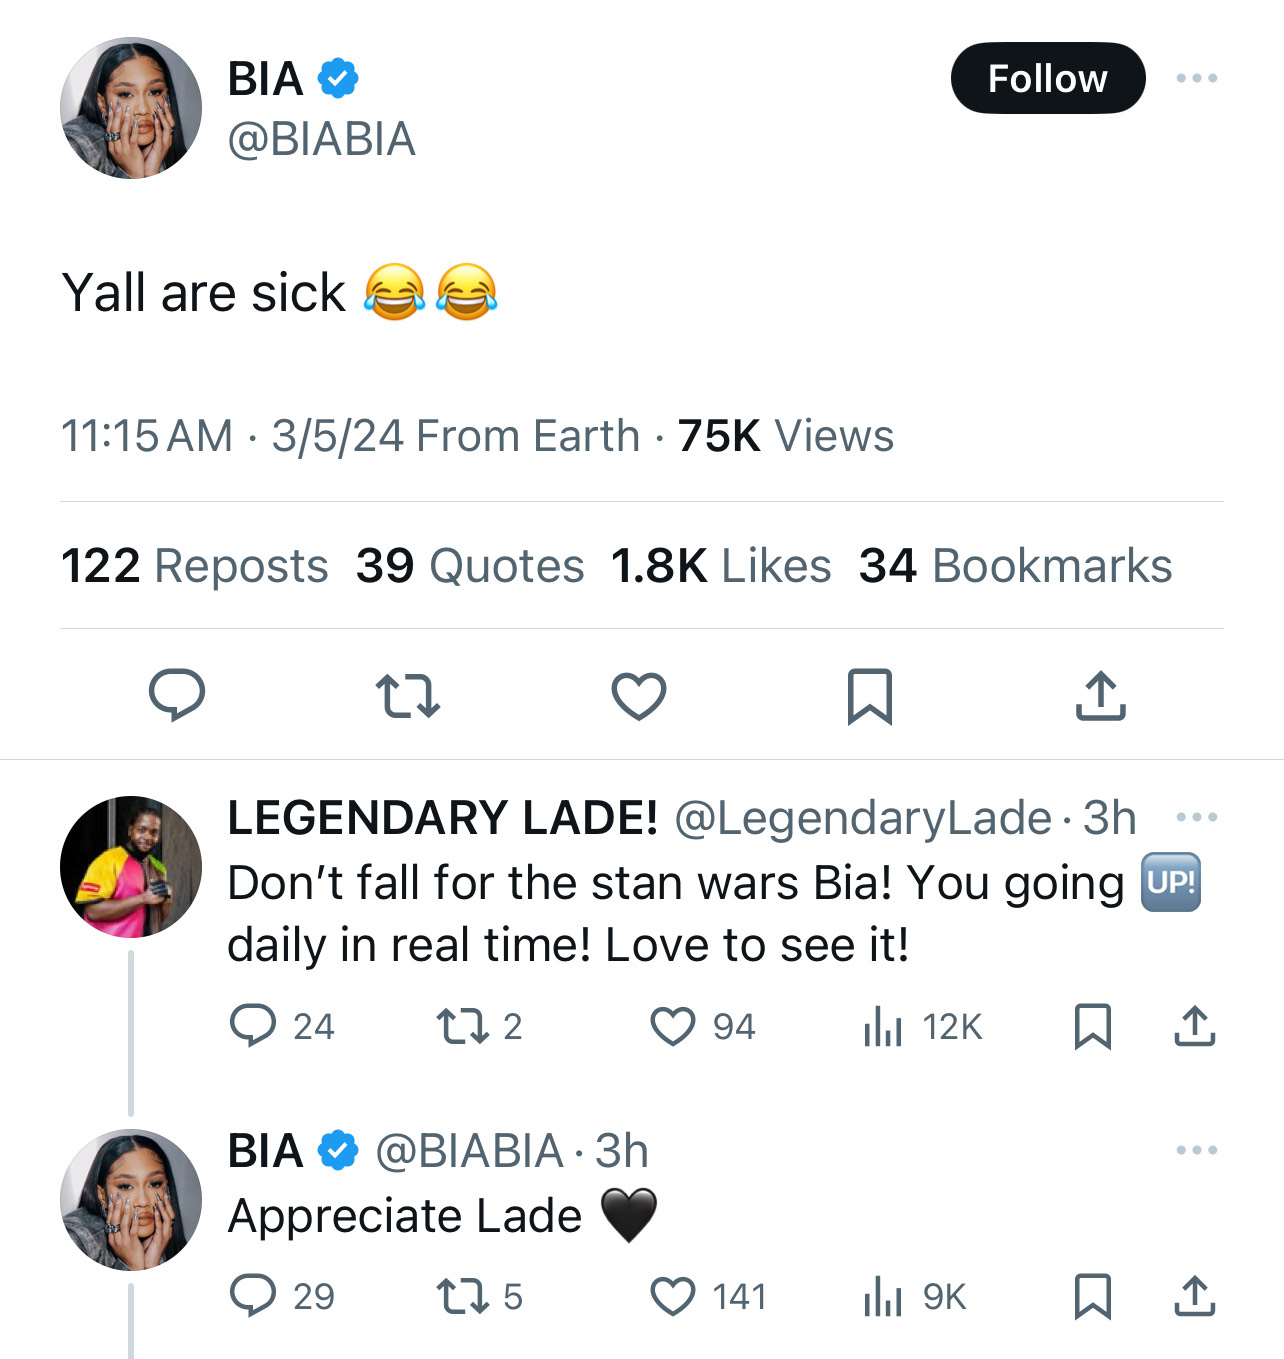 The image shows a screenshot of tweets from the user @BIA with replies and reactions to their post